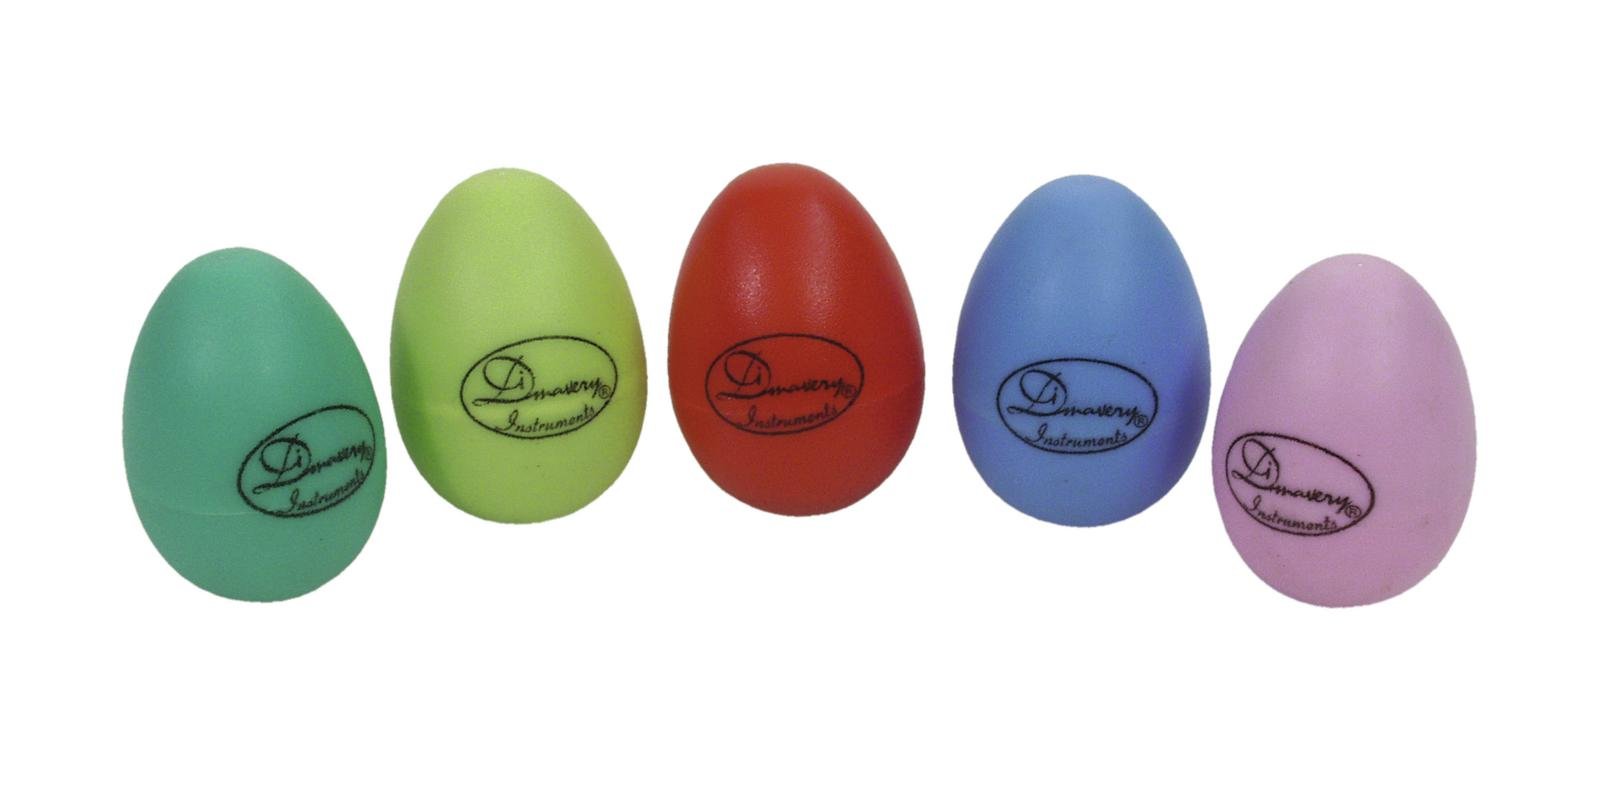 DIMAVERY Egg shaker colored 2x